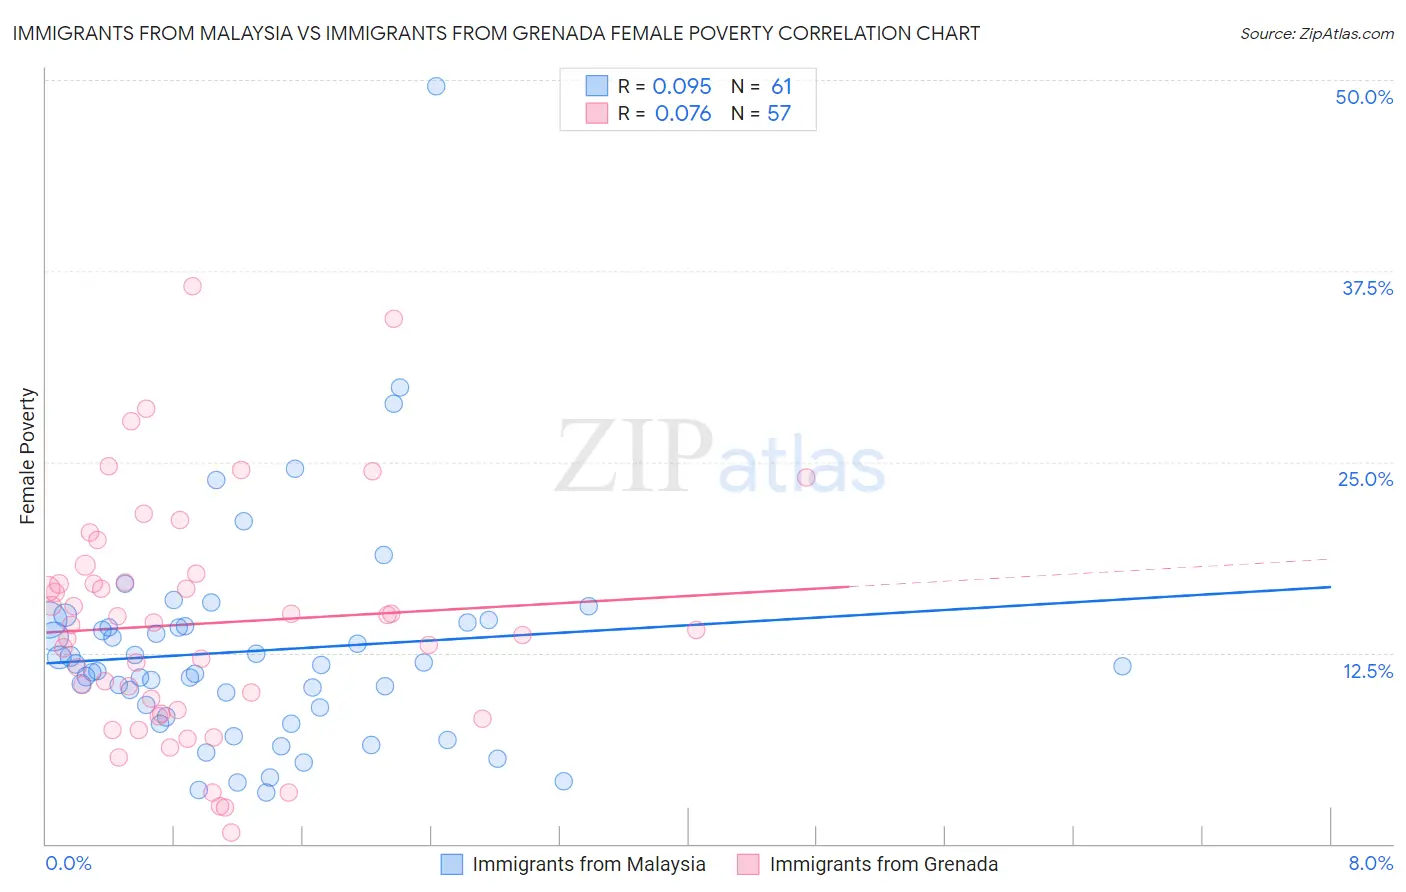 Immigrants from Malaysia vs Immigrants from Grenada Female Poverty